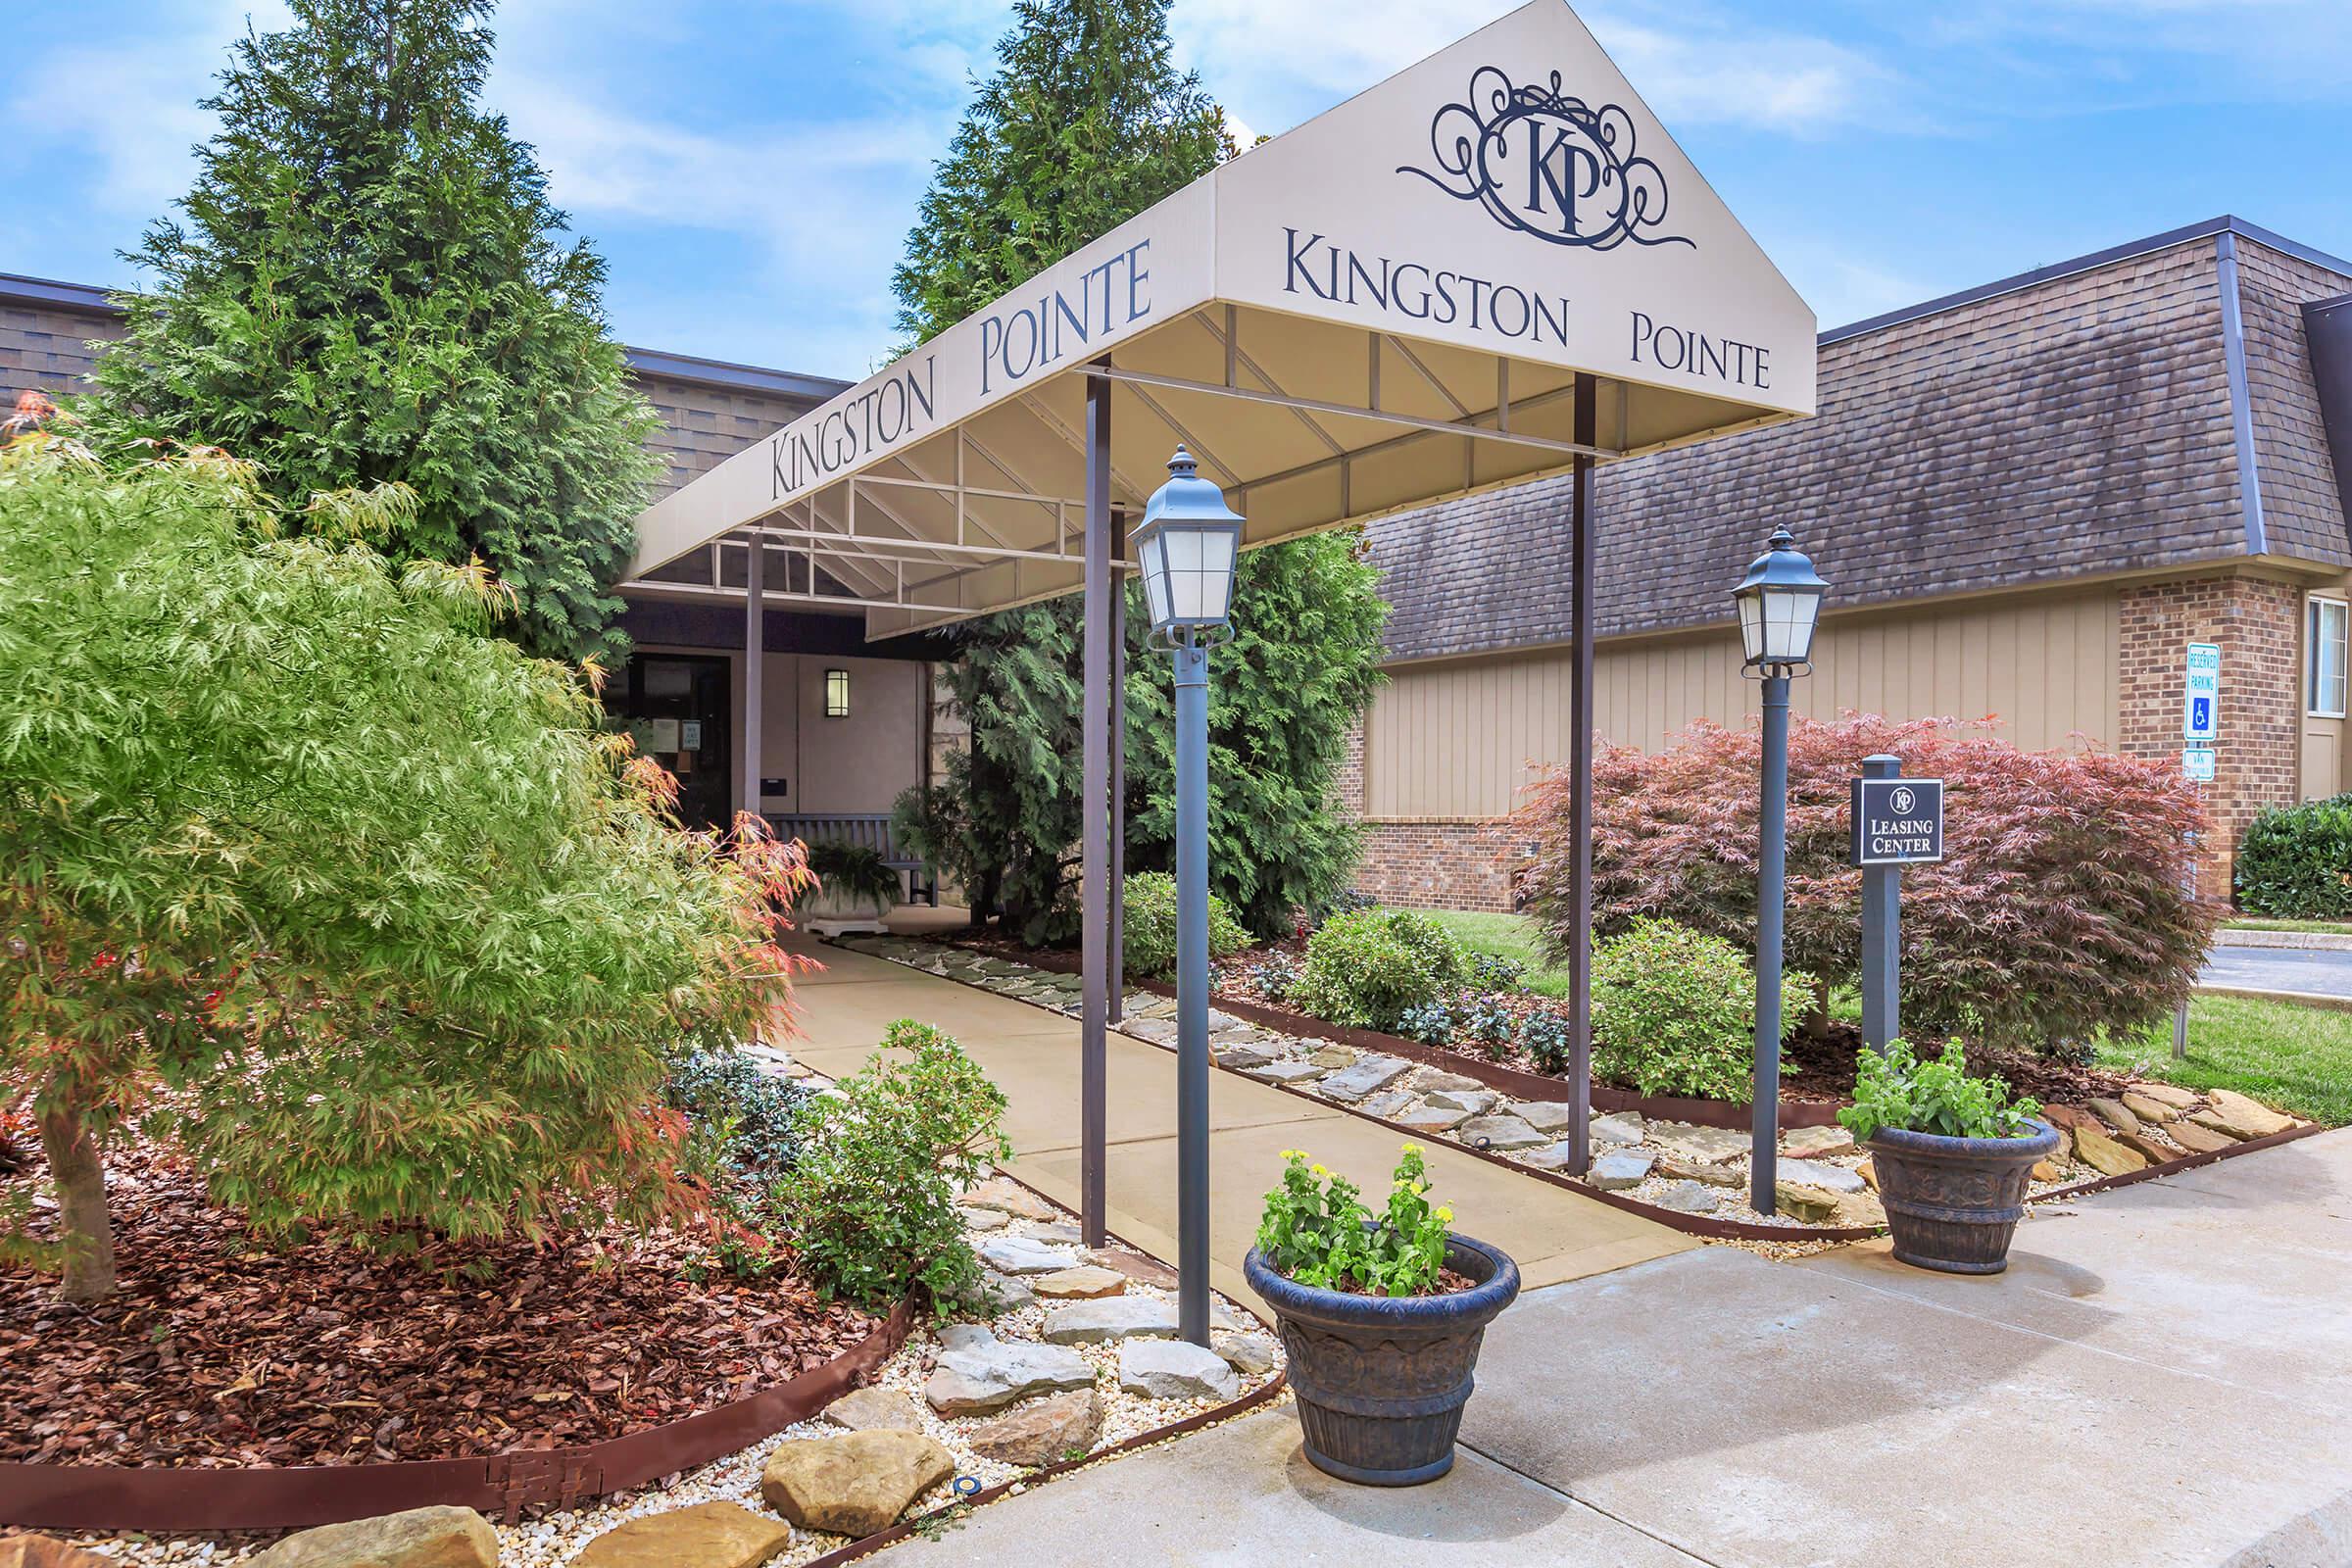 Welcome home to Kingston Pointe Apartments in Knoxville, Tennessee